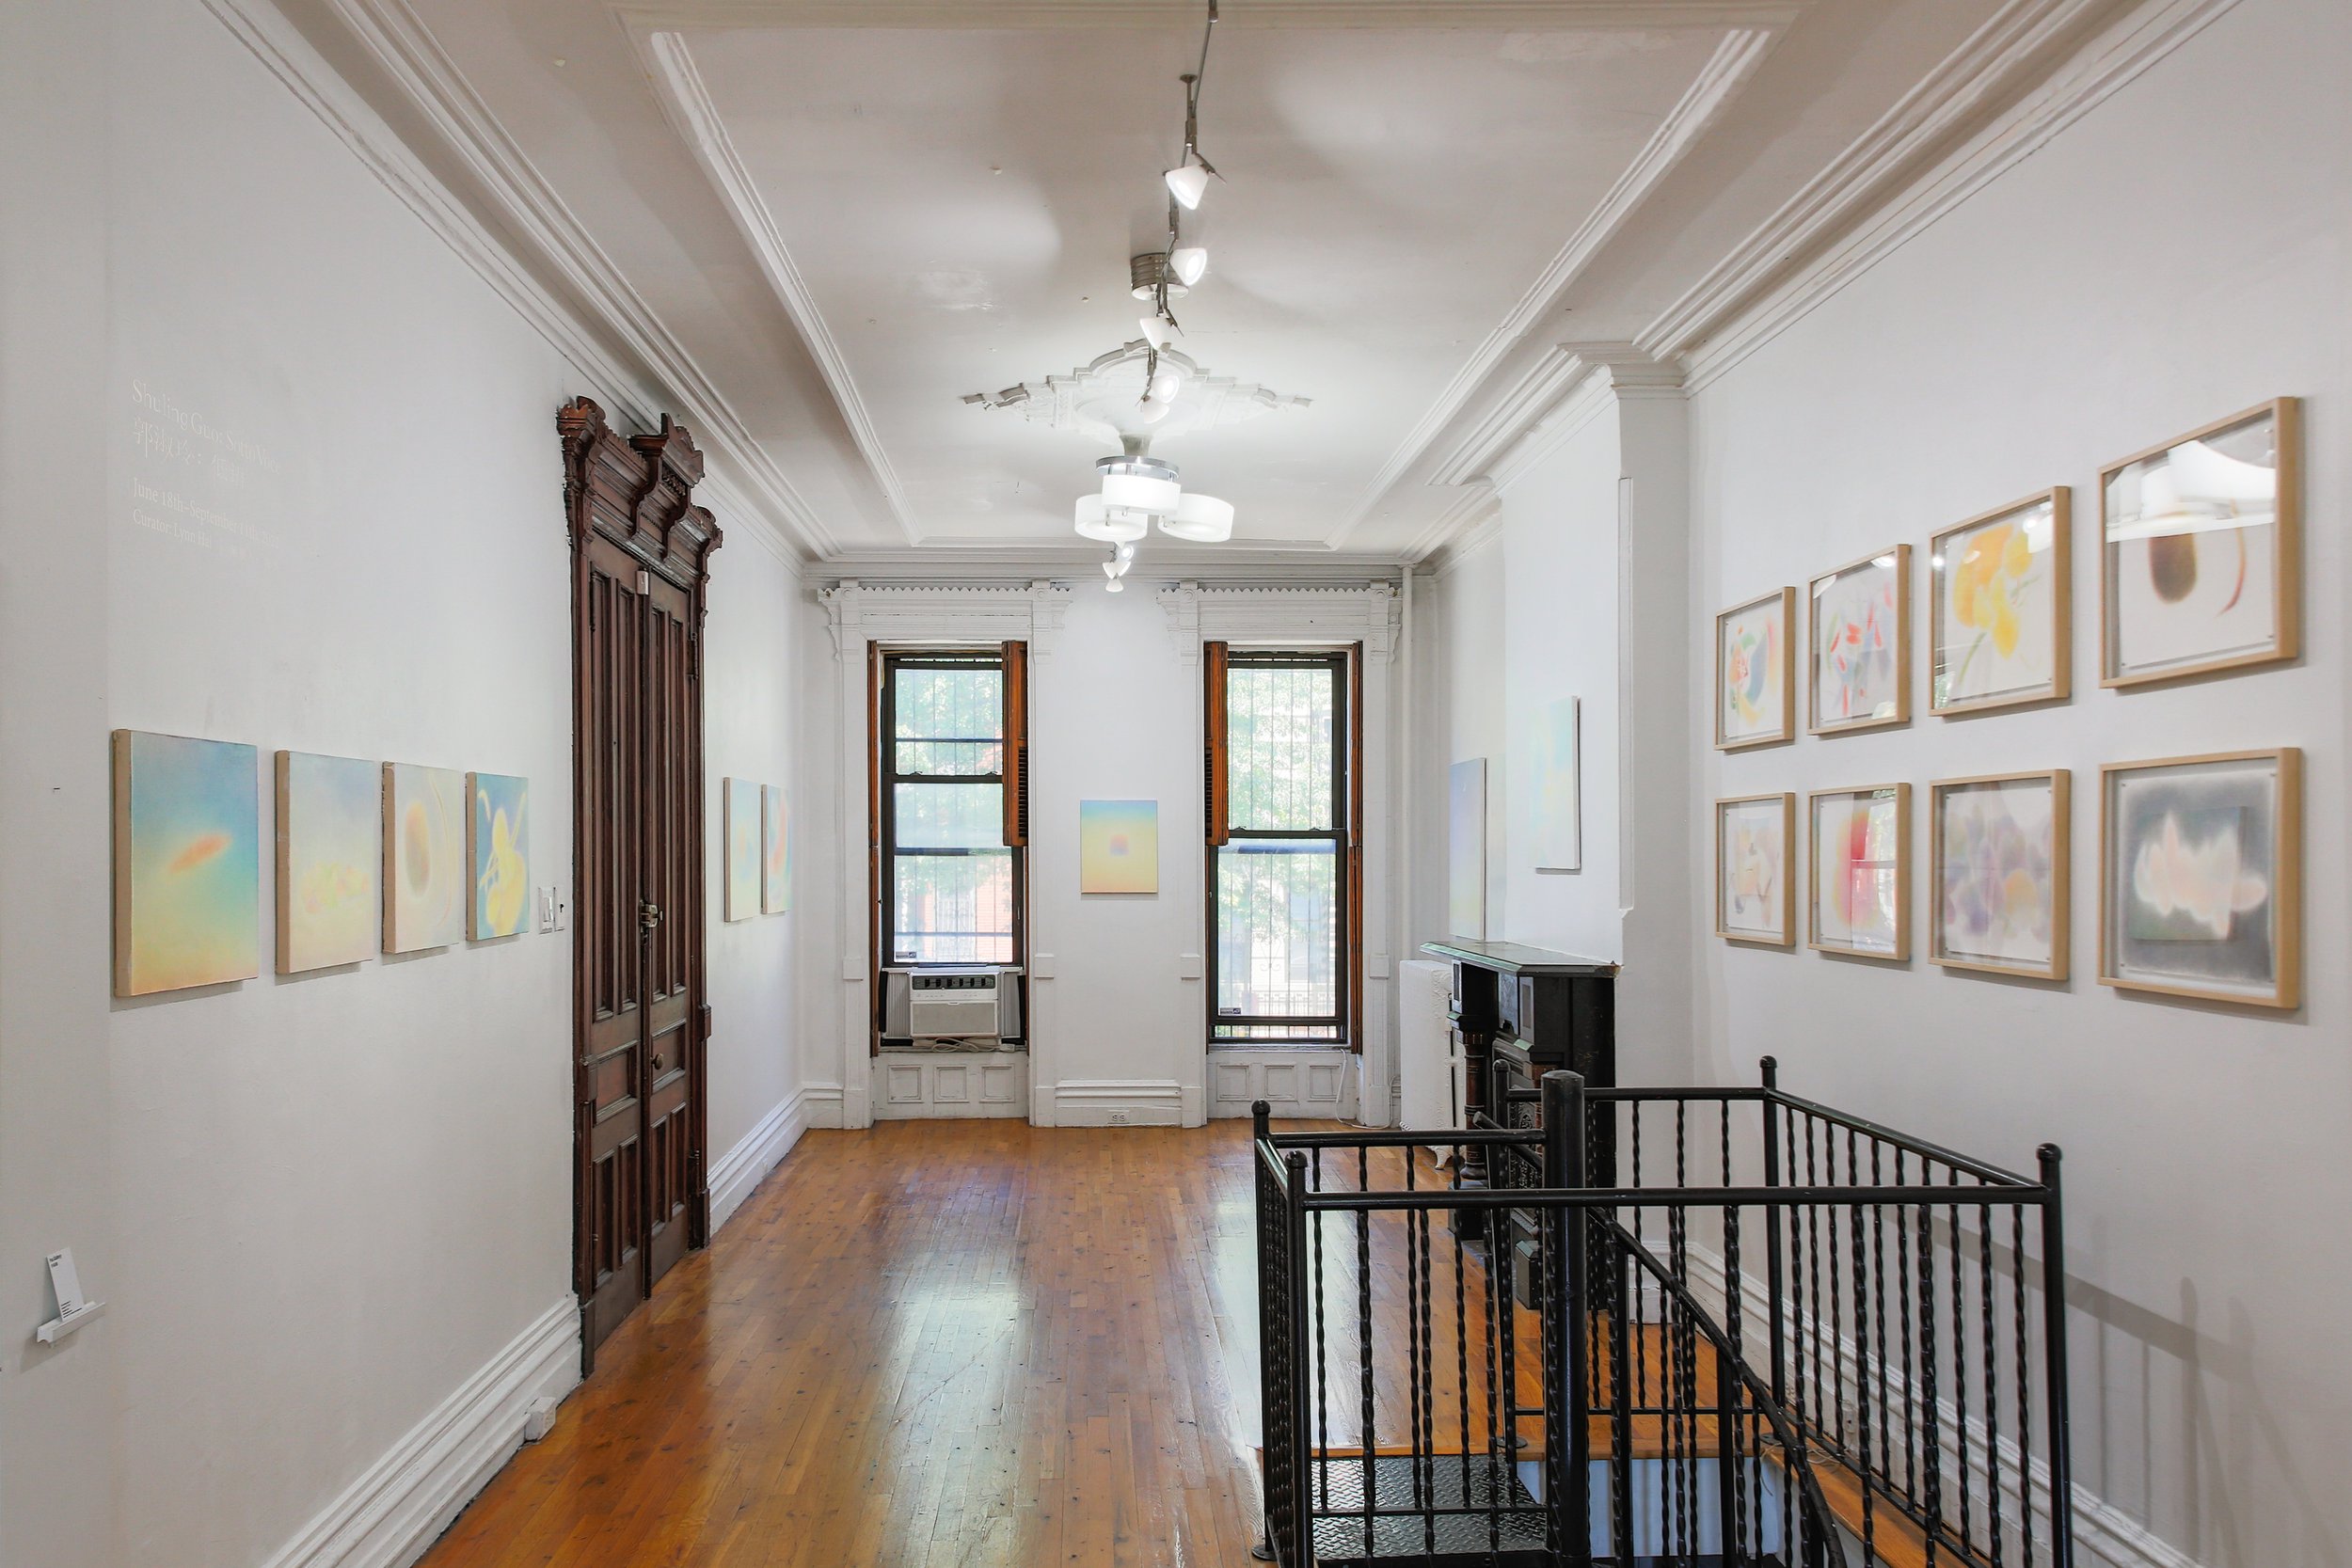  Installation view of Shuling Guo: Sotto Voce. Photo by Lynn Hai ©Shuling Guo, courtesy of Fou Gallery 